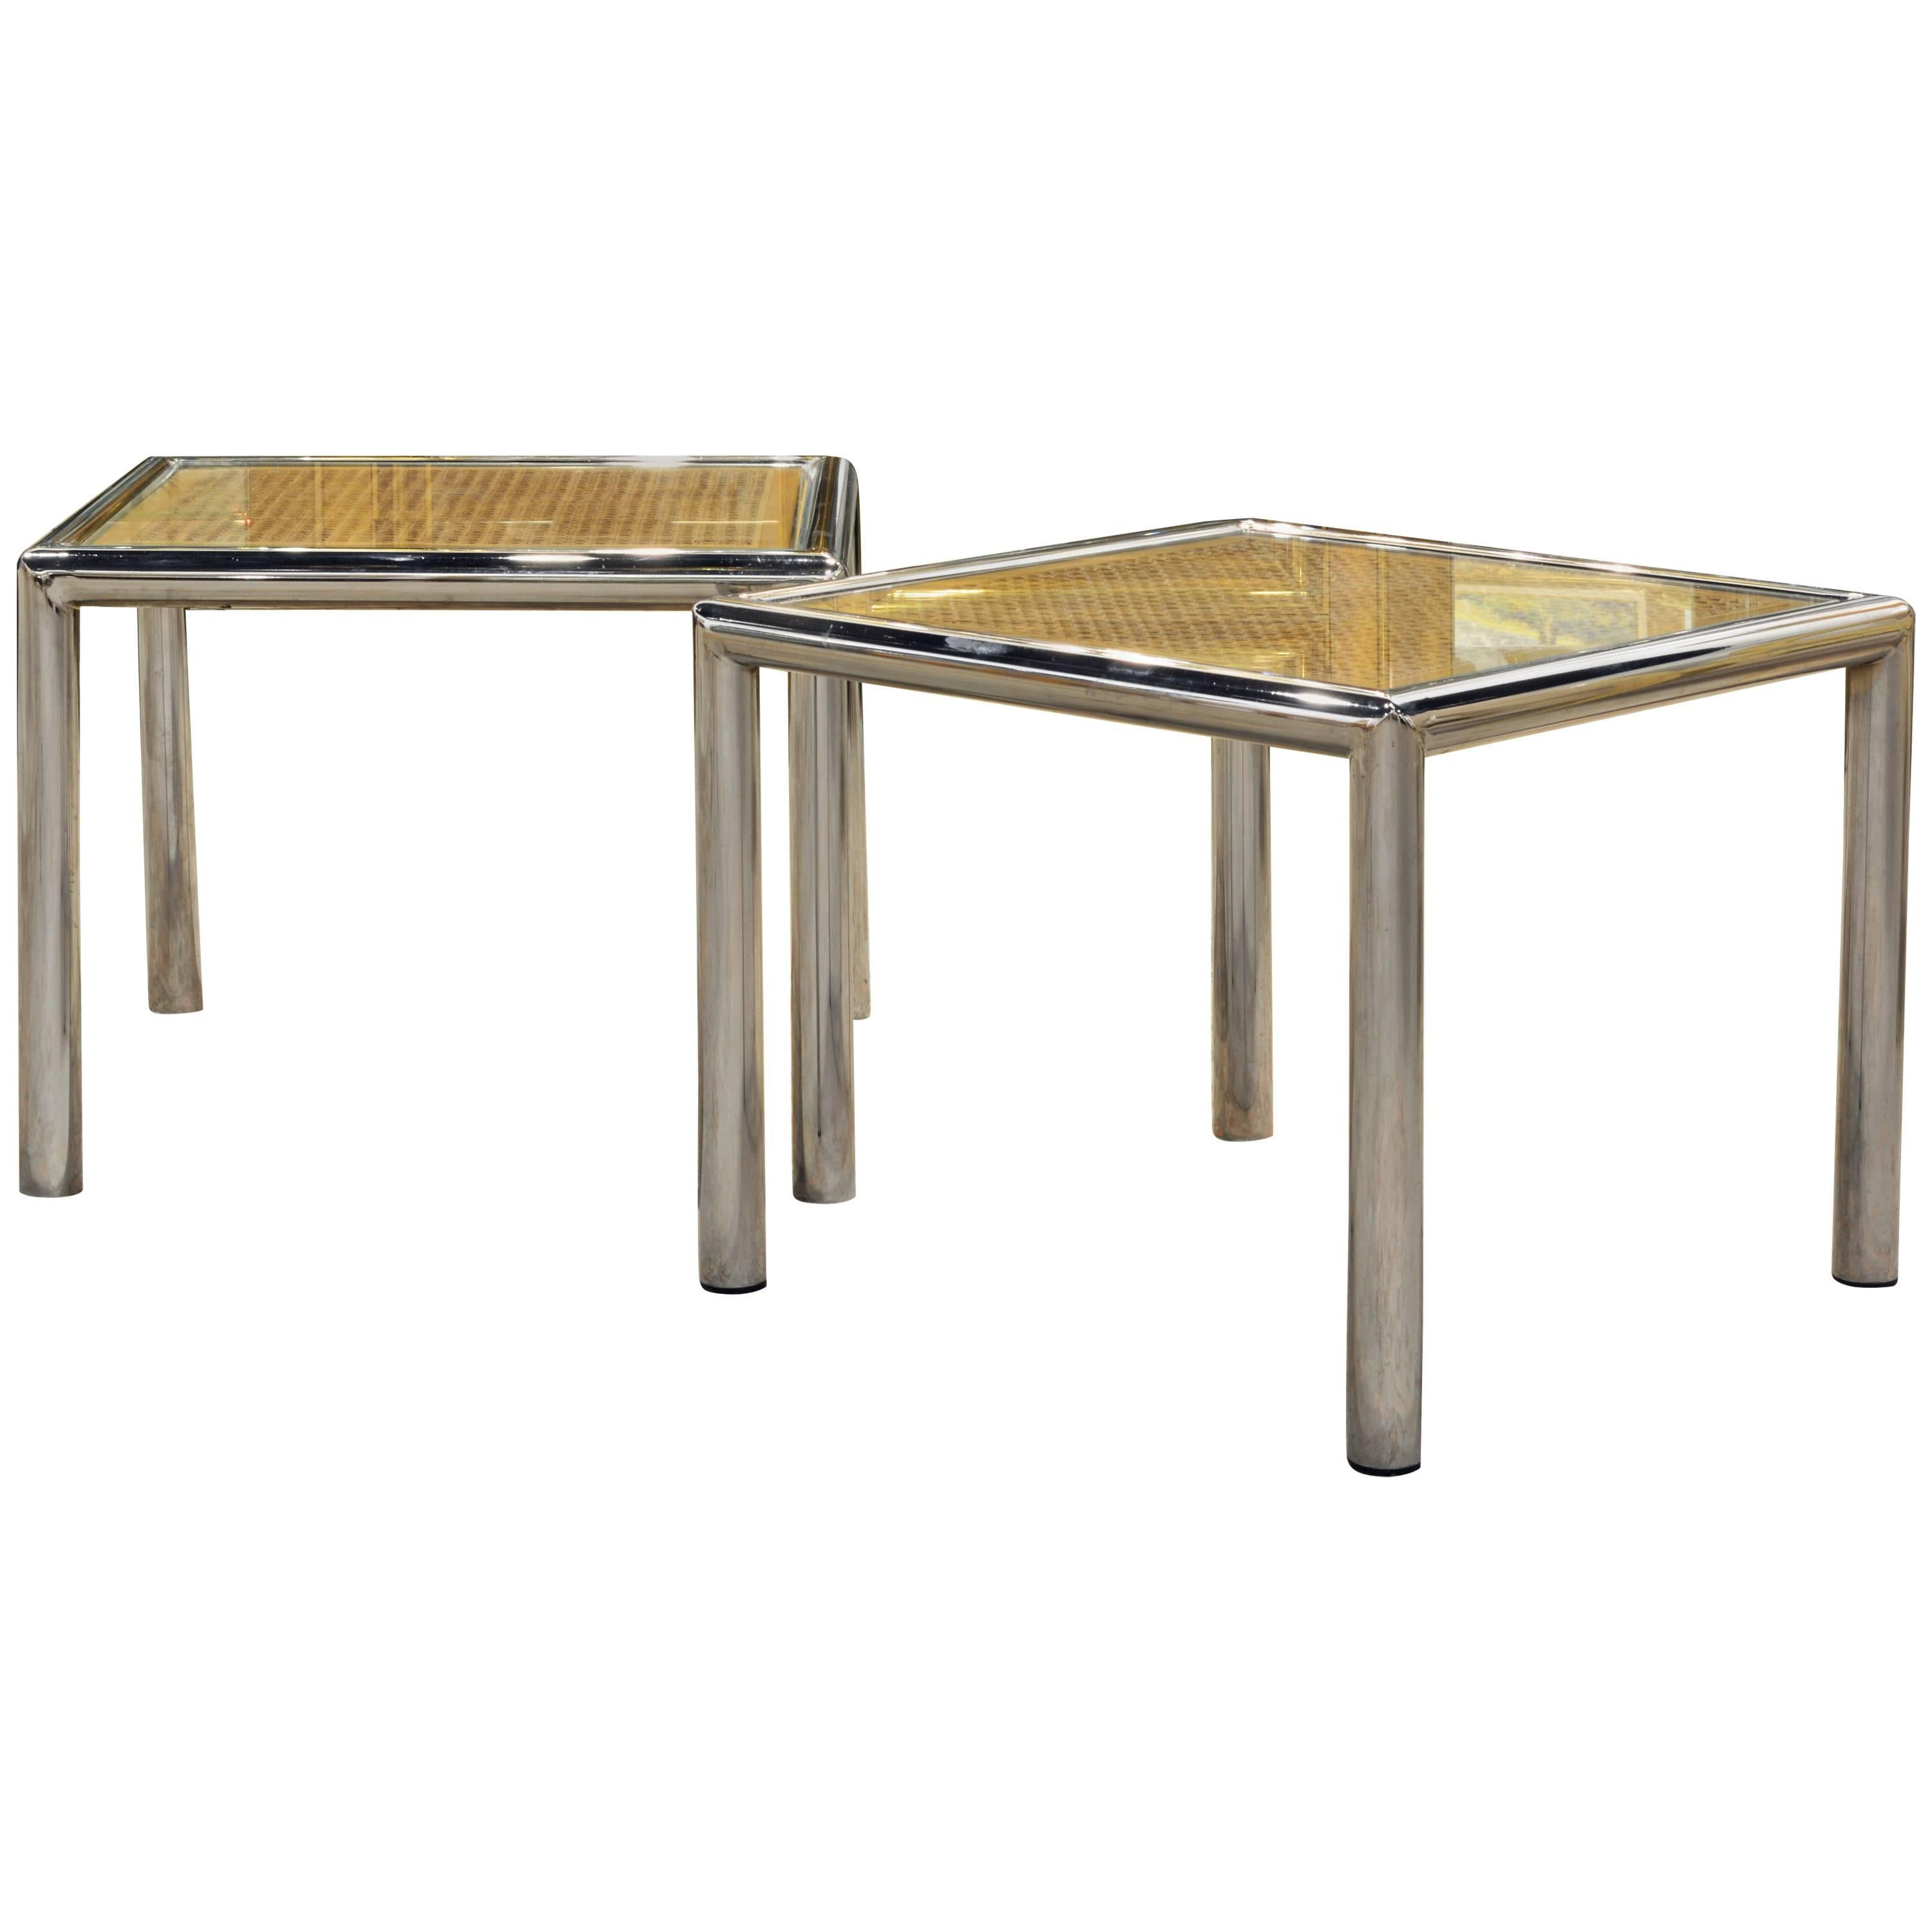 Pair of Tubular Chrome Frame and Caned Glass Top Side Tables by Milo Baughman